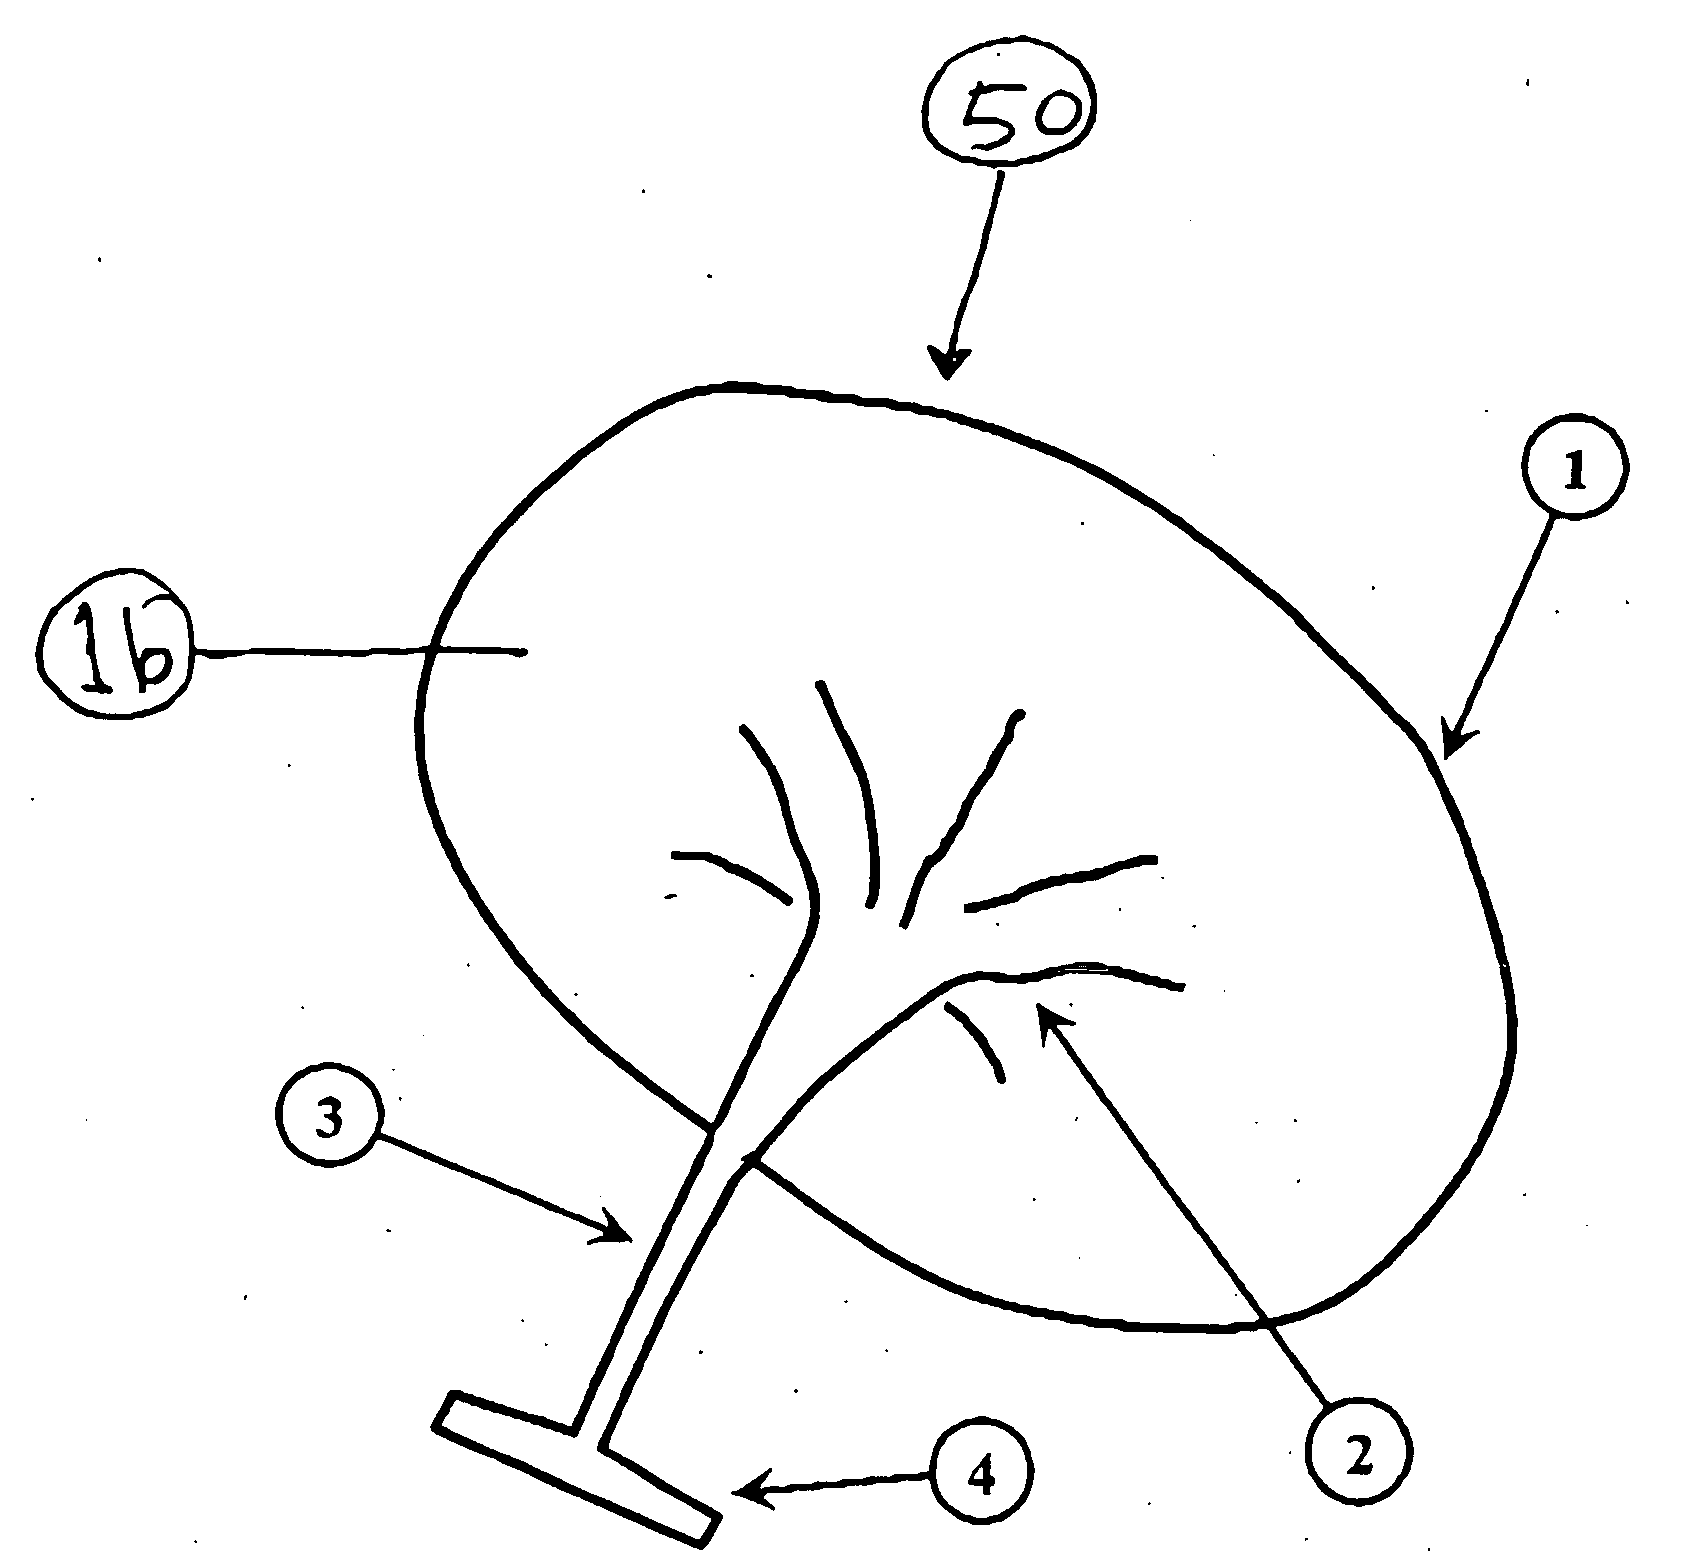 Abdominal muscle exercise apparatus